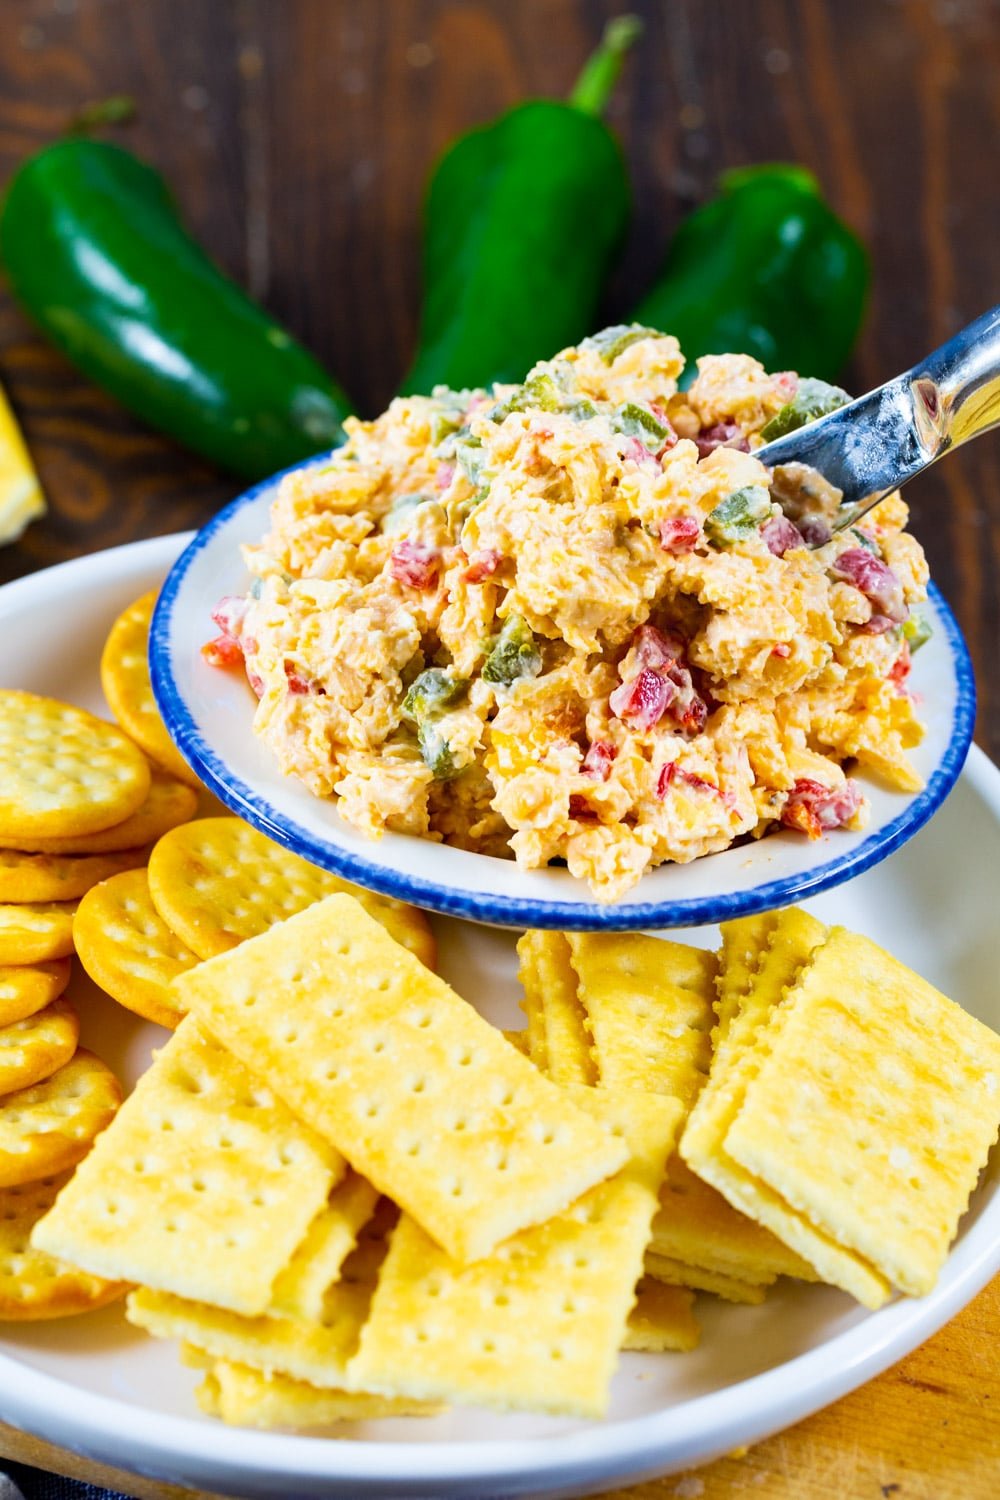 Pimento Cheese in a small bowl on a plate surrounded by crackers.